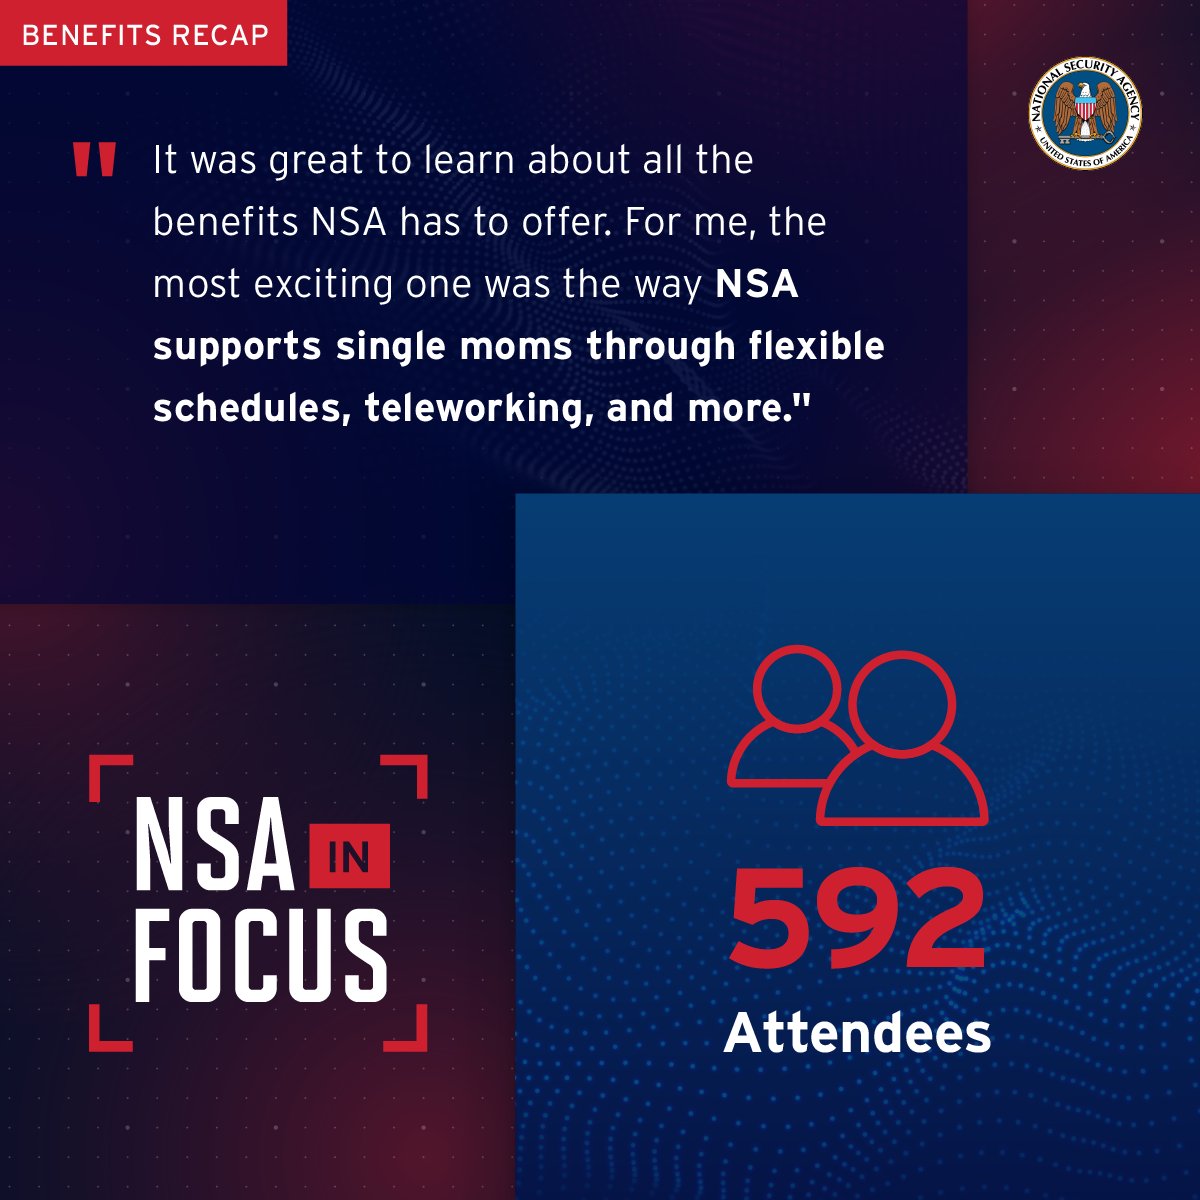 Almost 600 attendees tuned in for our latest #NSAinFocus about the incredible benefits employees receive at the agency. Learn more by watching the full recording here: bit.ly/4dx7NiN. #employeebenefits